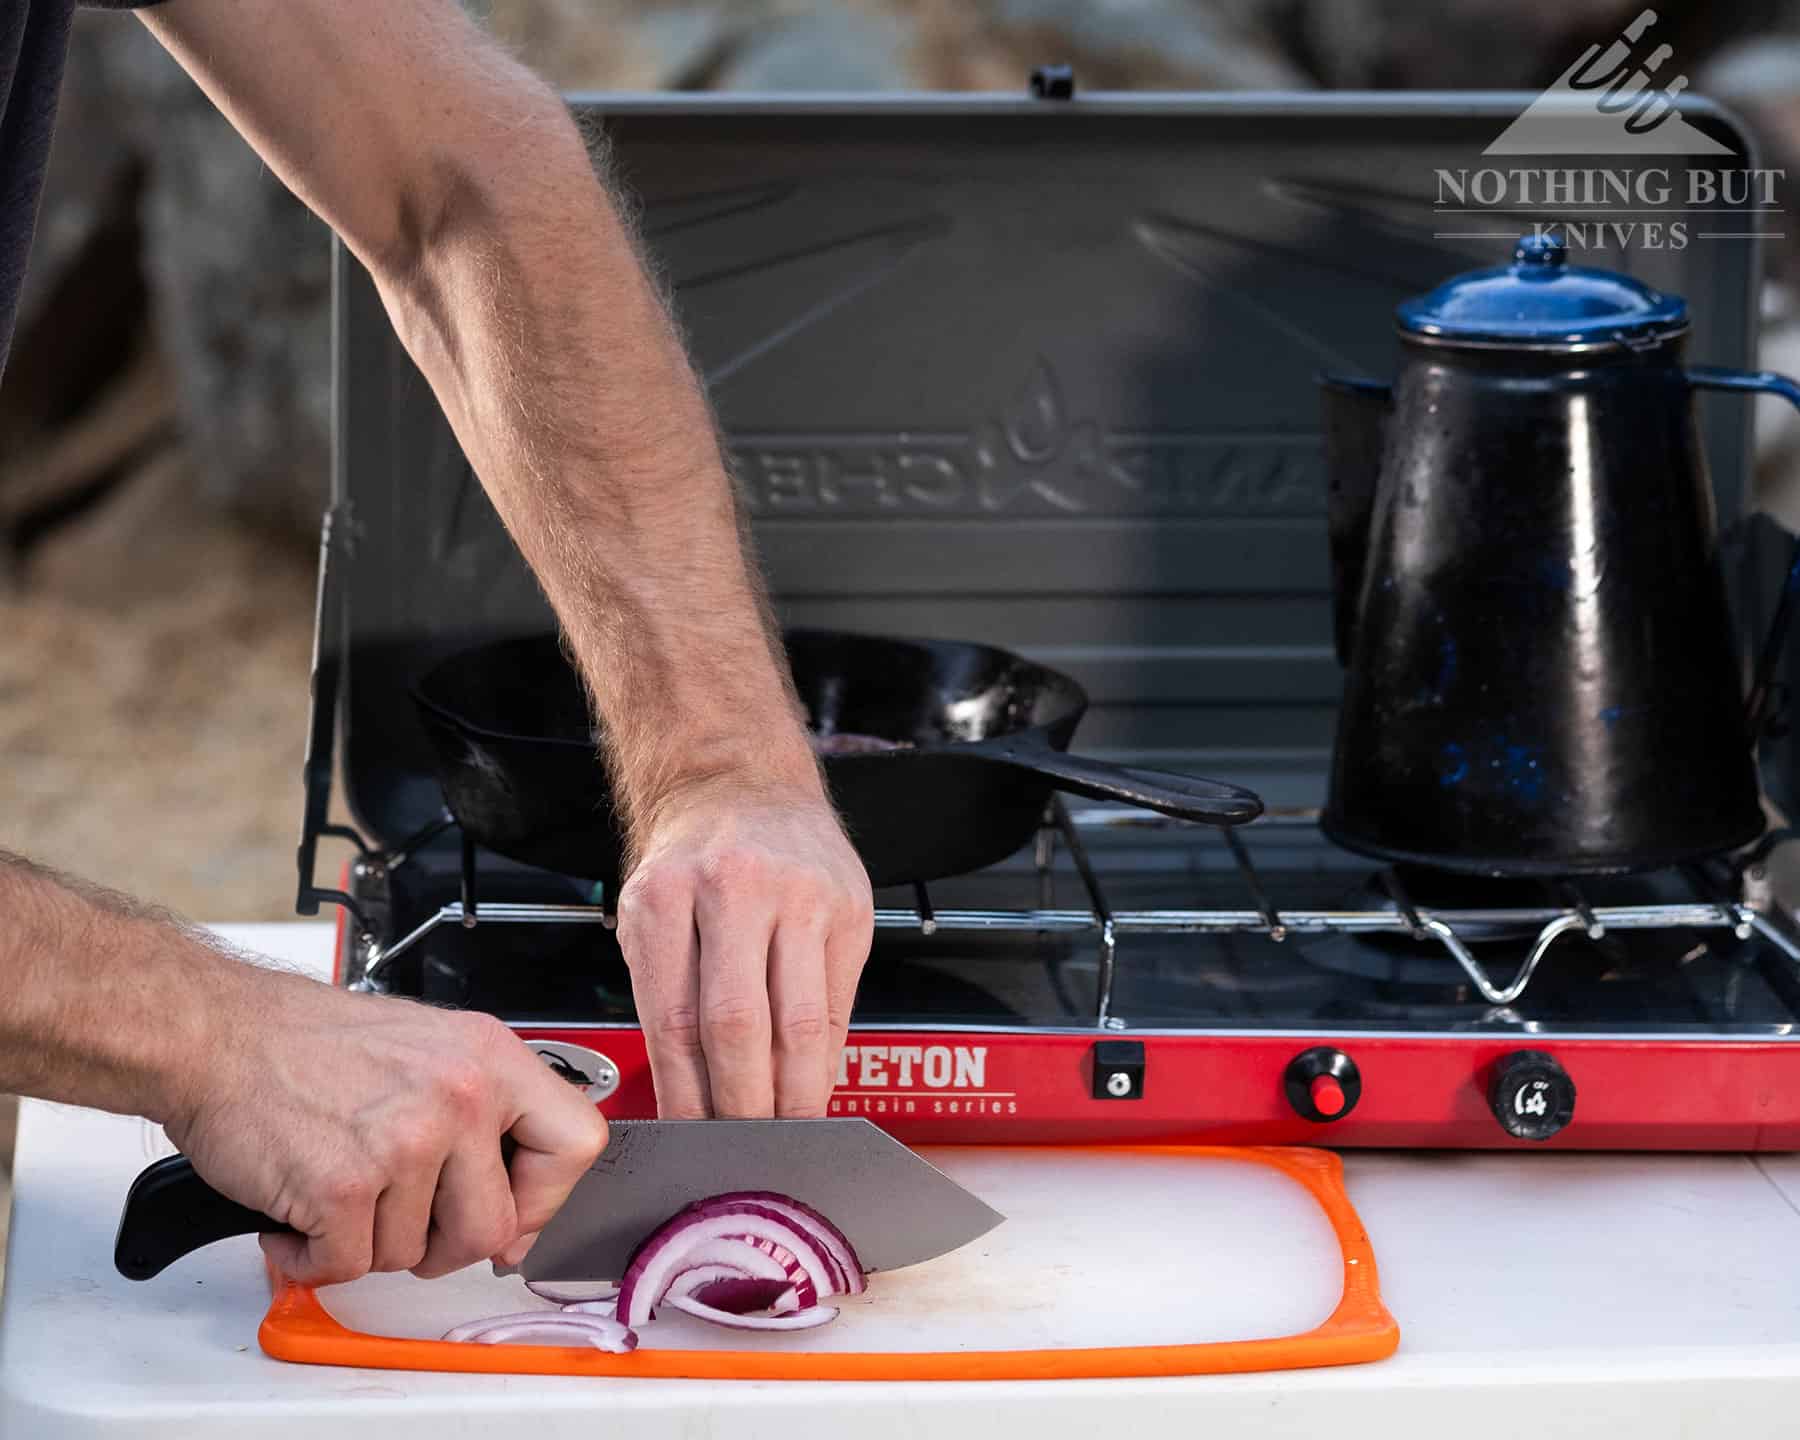 Camp stove cooking with the Off-Grid Grizzly V2.